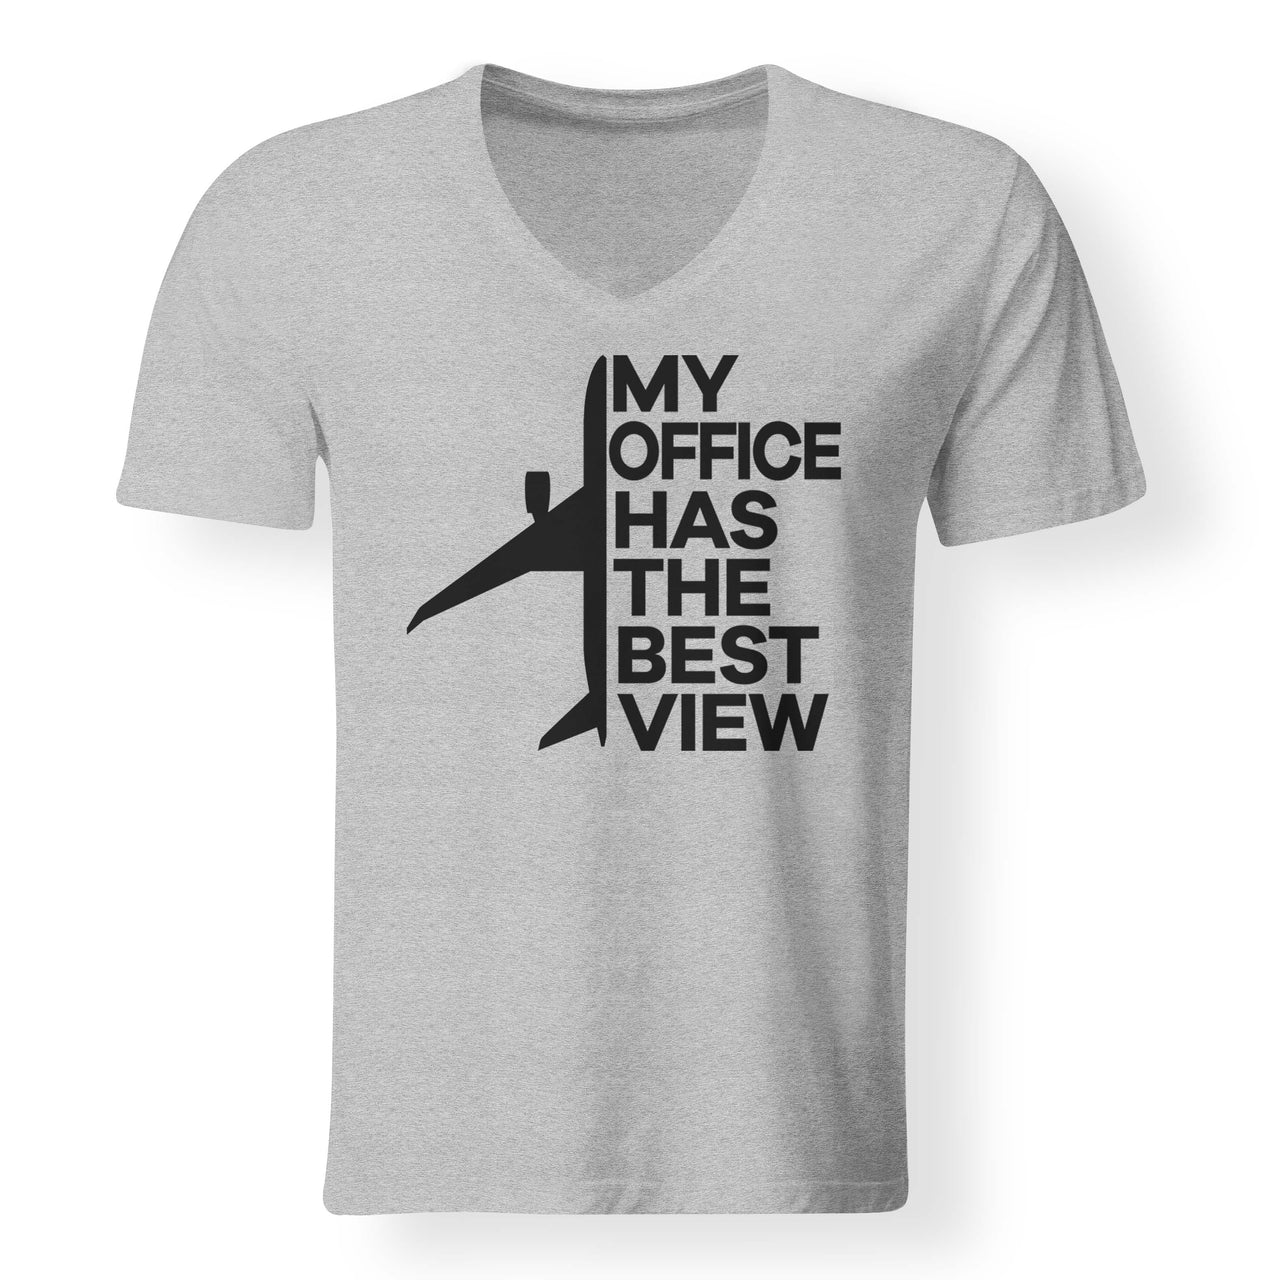 My Office Has The Best View Designed V-Neck T-Shirts